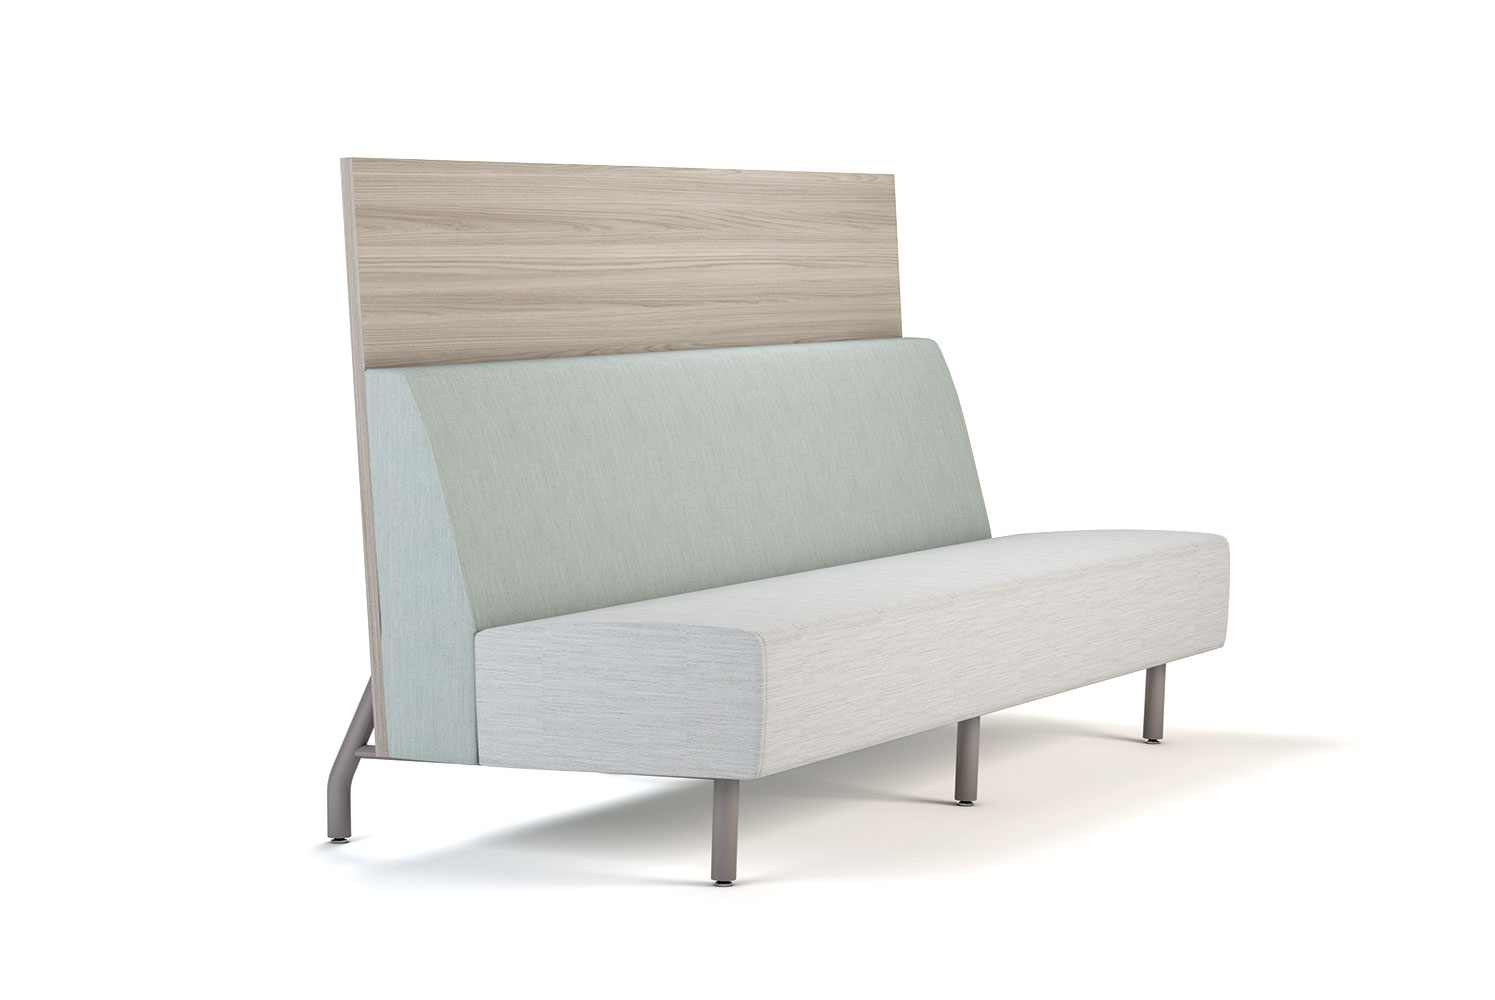 Tivoli 72 inch Banquette with Angled Legs and Laminate Panel